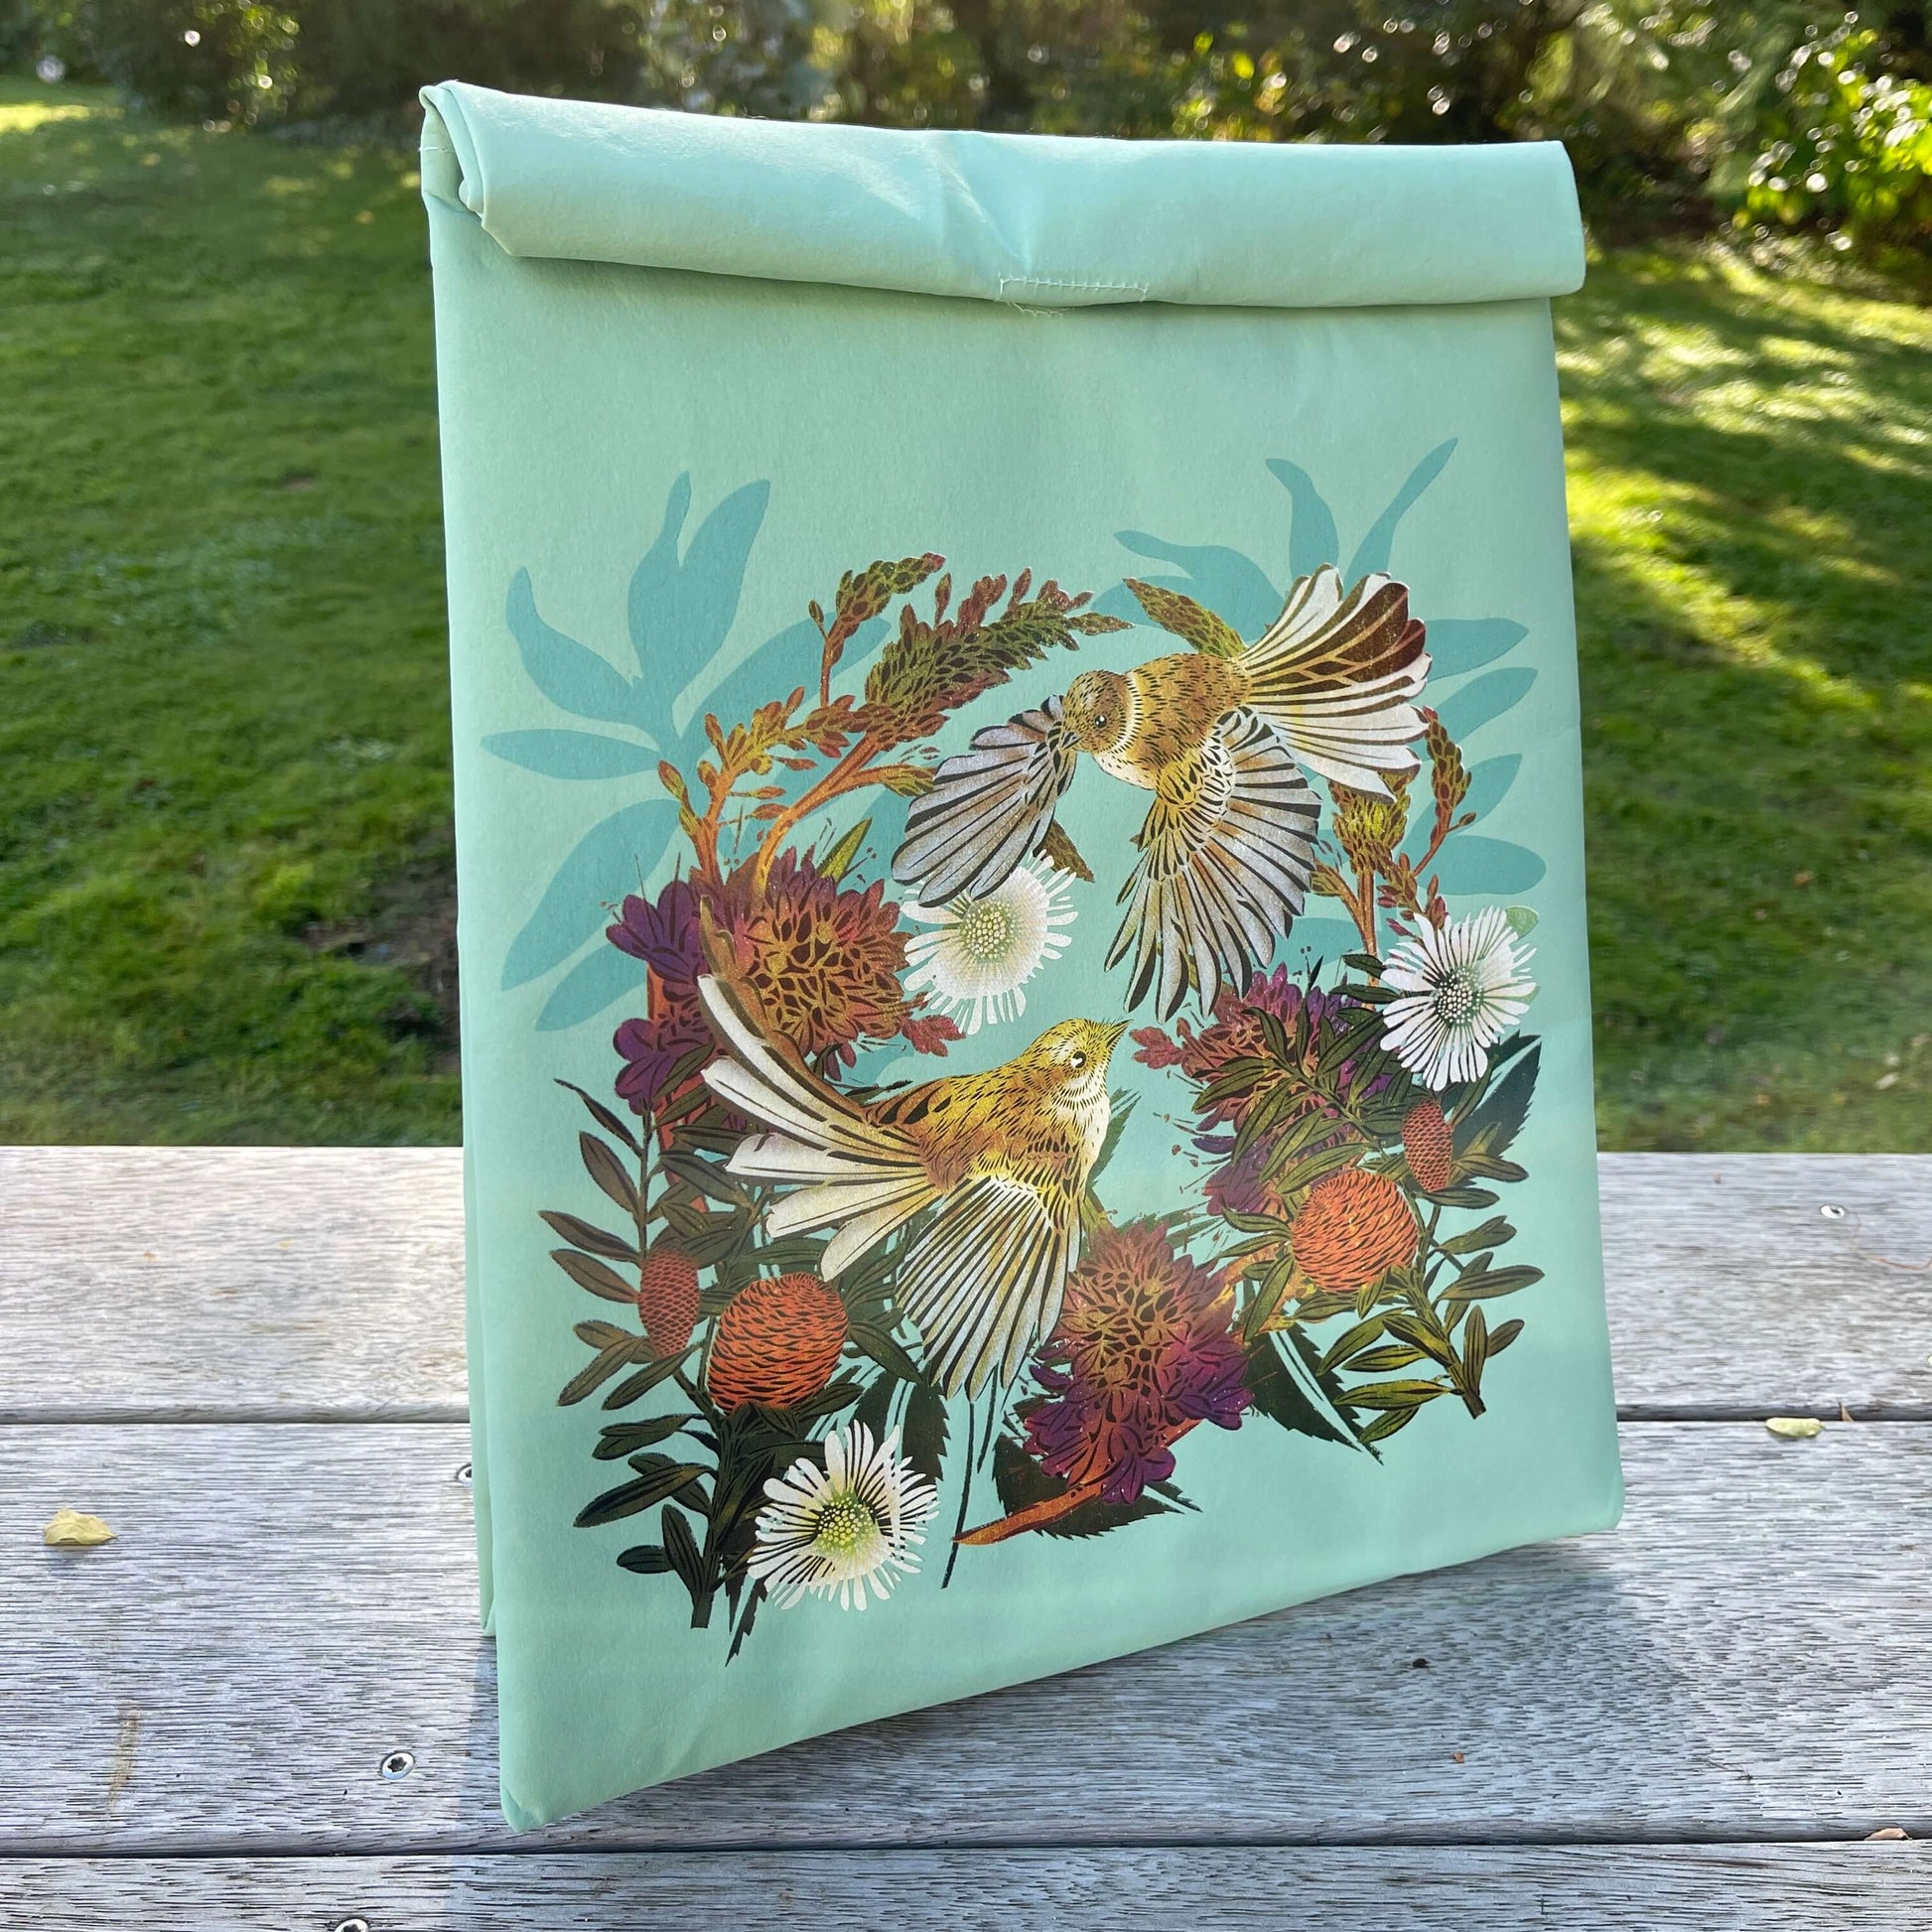 Light blue folding paper style lunch bag with floral and bird design.